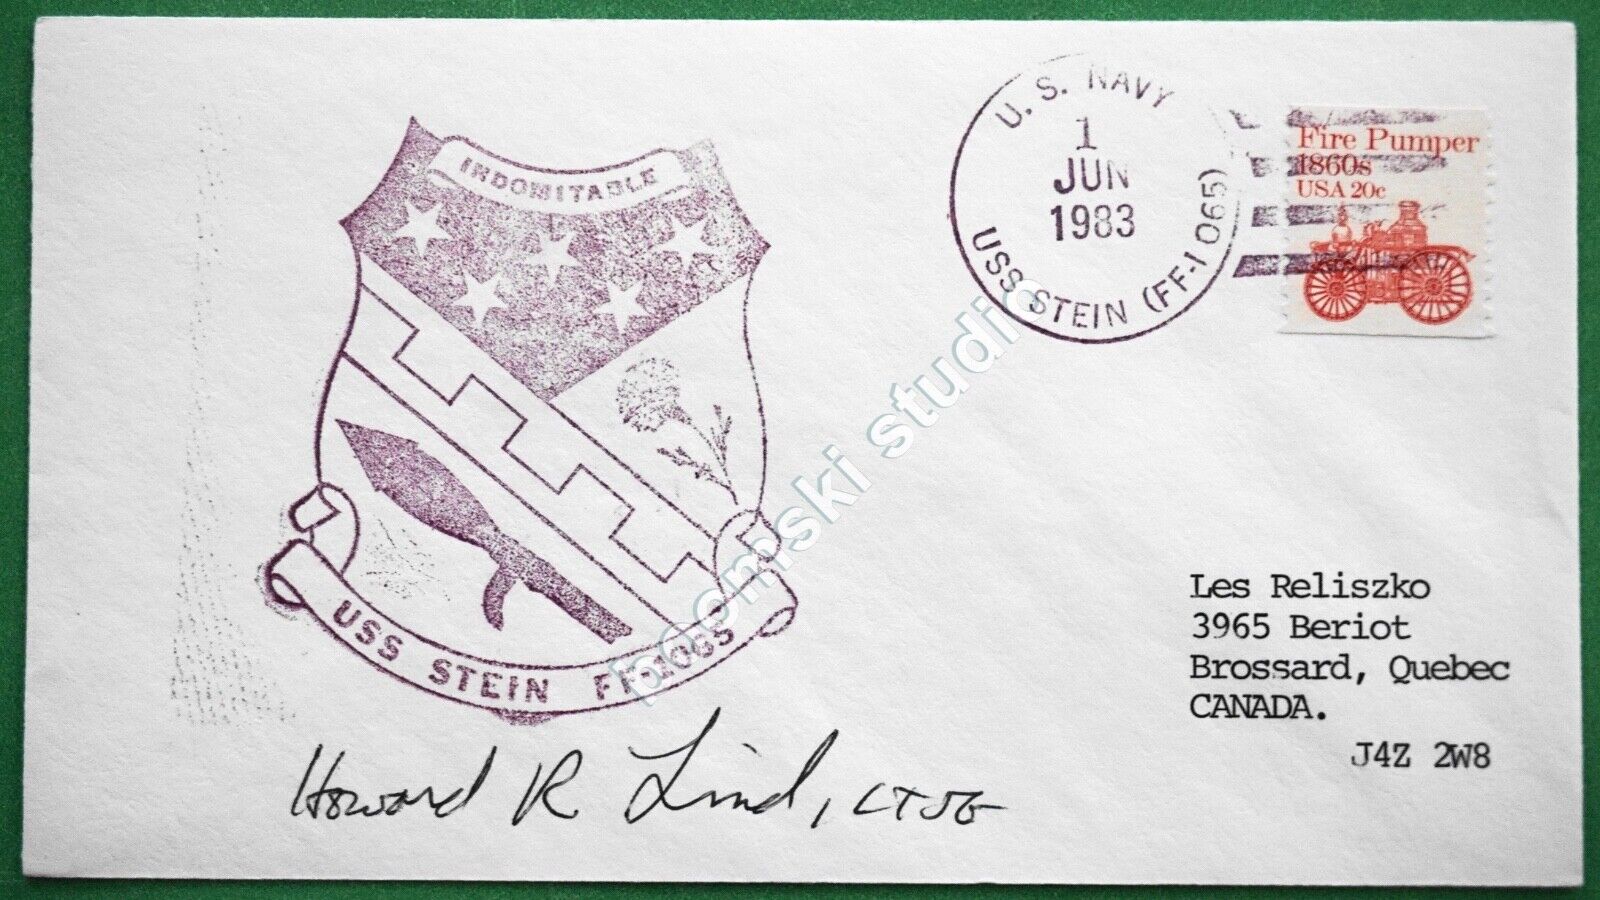 USS STEIN FF-1065 signed cover dated 1983 (CAN-77)